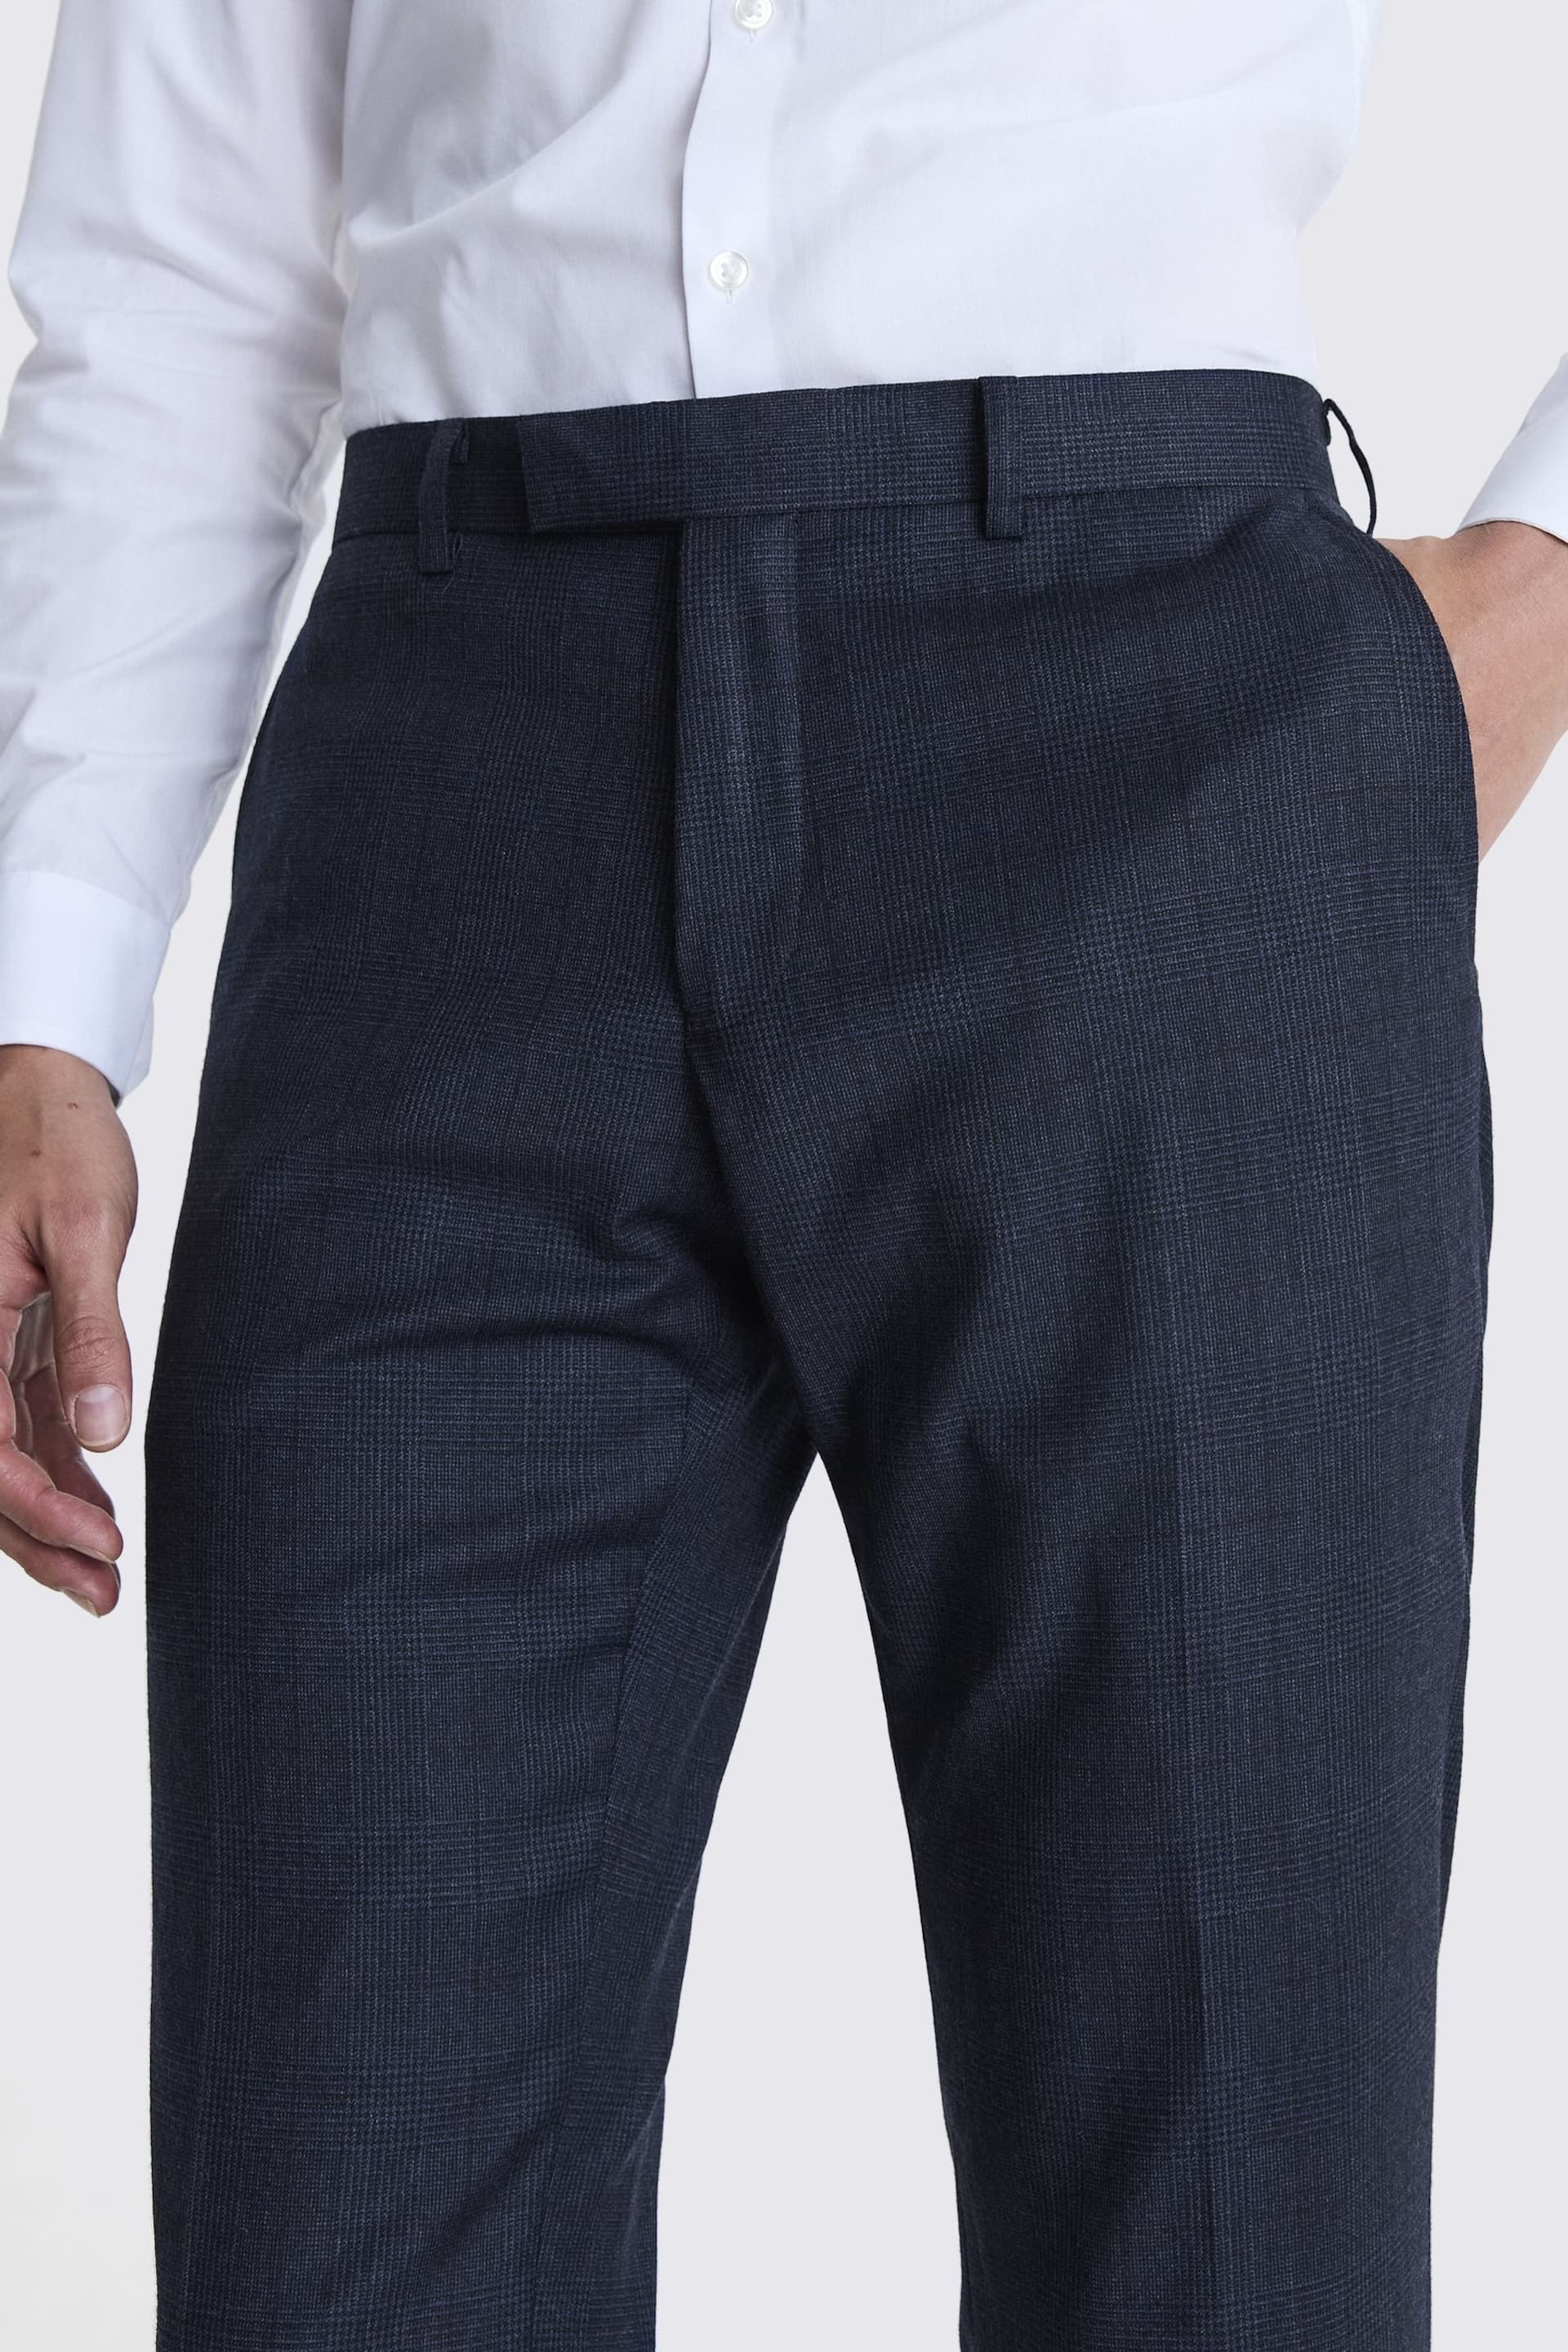 MOSS Navy Blue Tailored Fit Milled Check Suit Trousers - Image 3 of 3